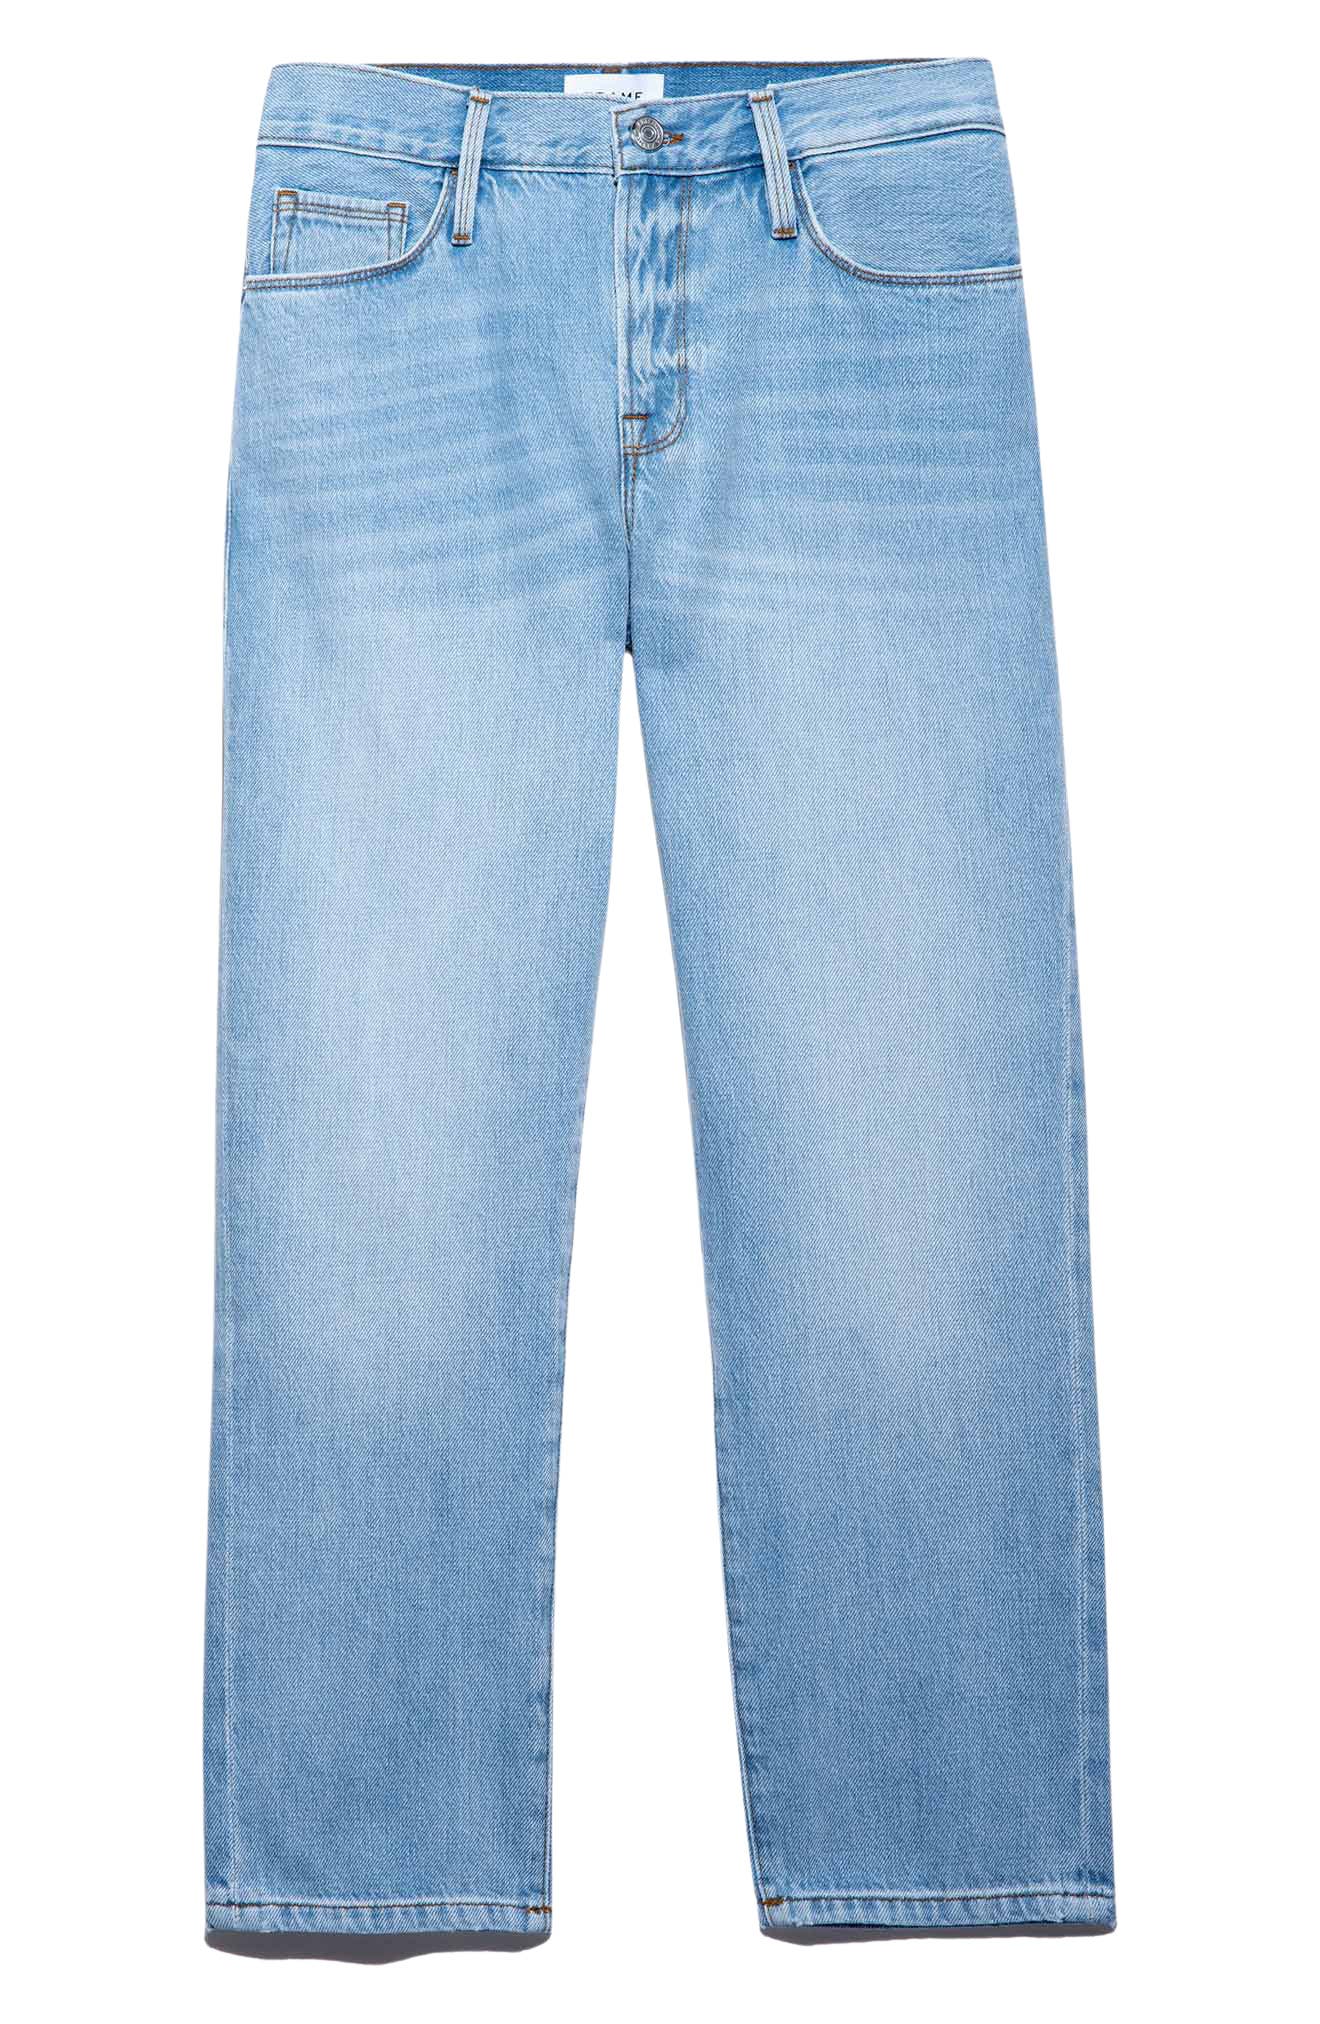 FRAME Le Nouveau Distressed Ankle Straight Leg Jeans in Natoma Clean